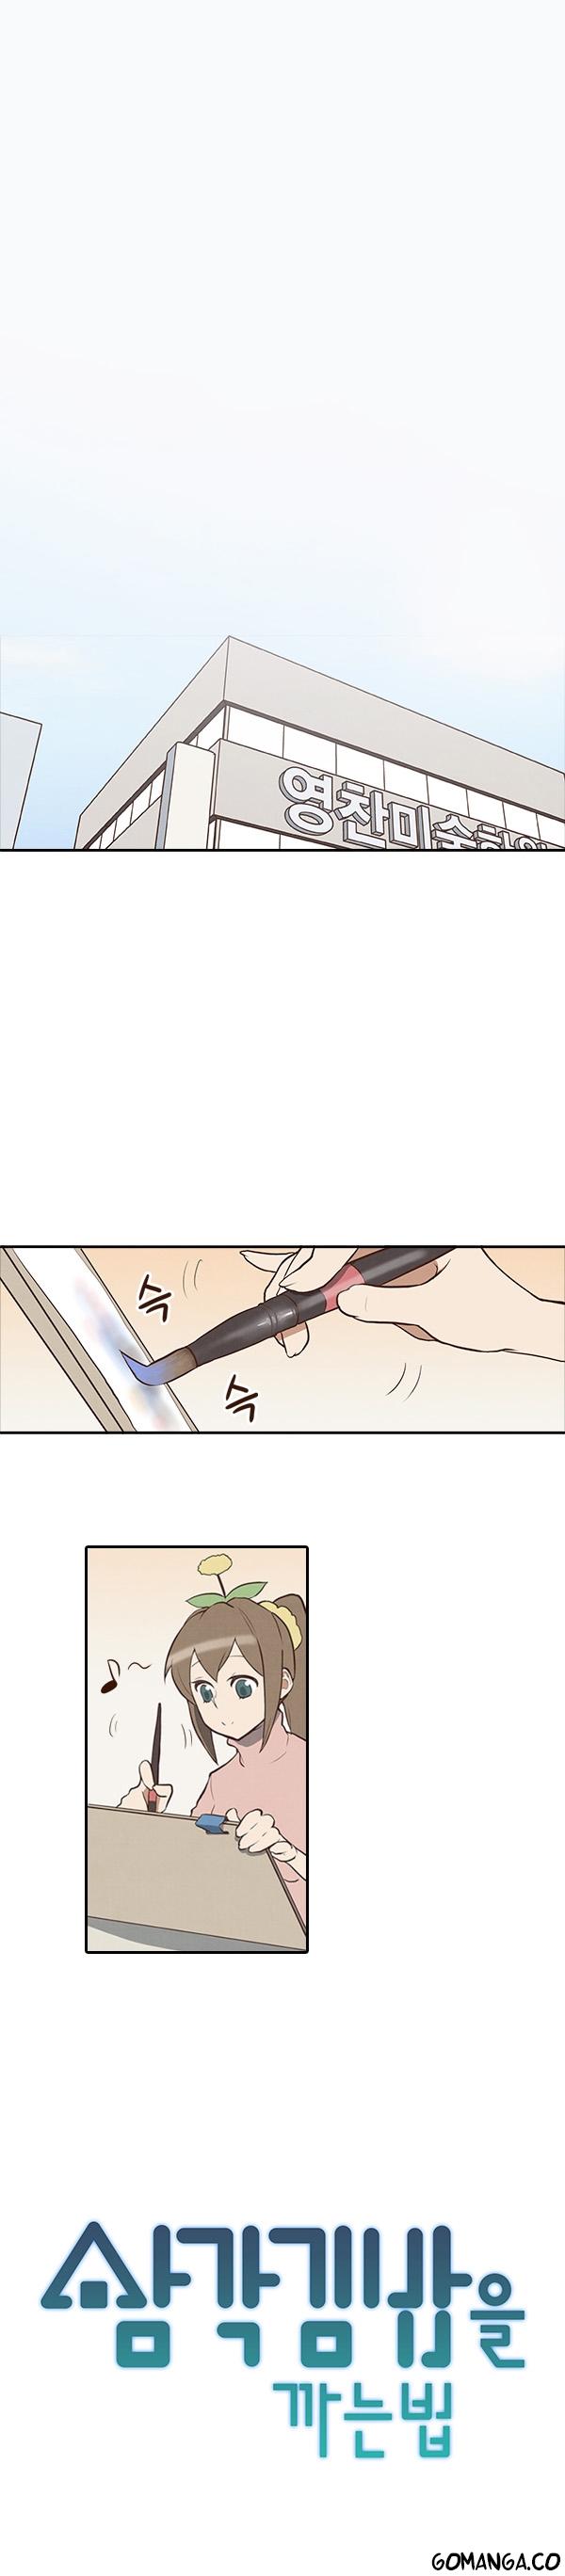 How to Open a Triangular Riceball - Chapter 7 Page 3